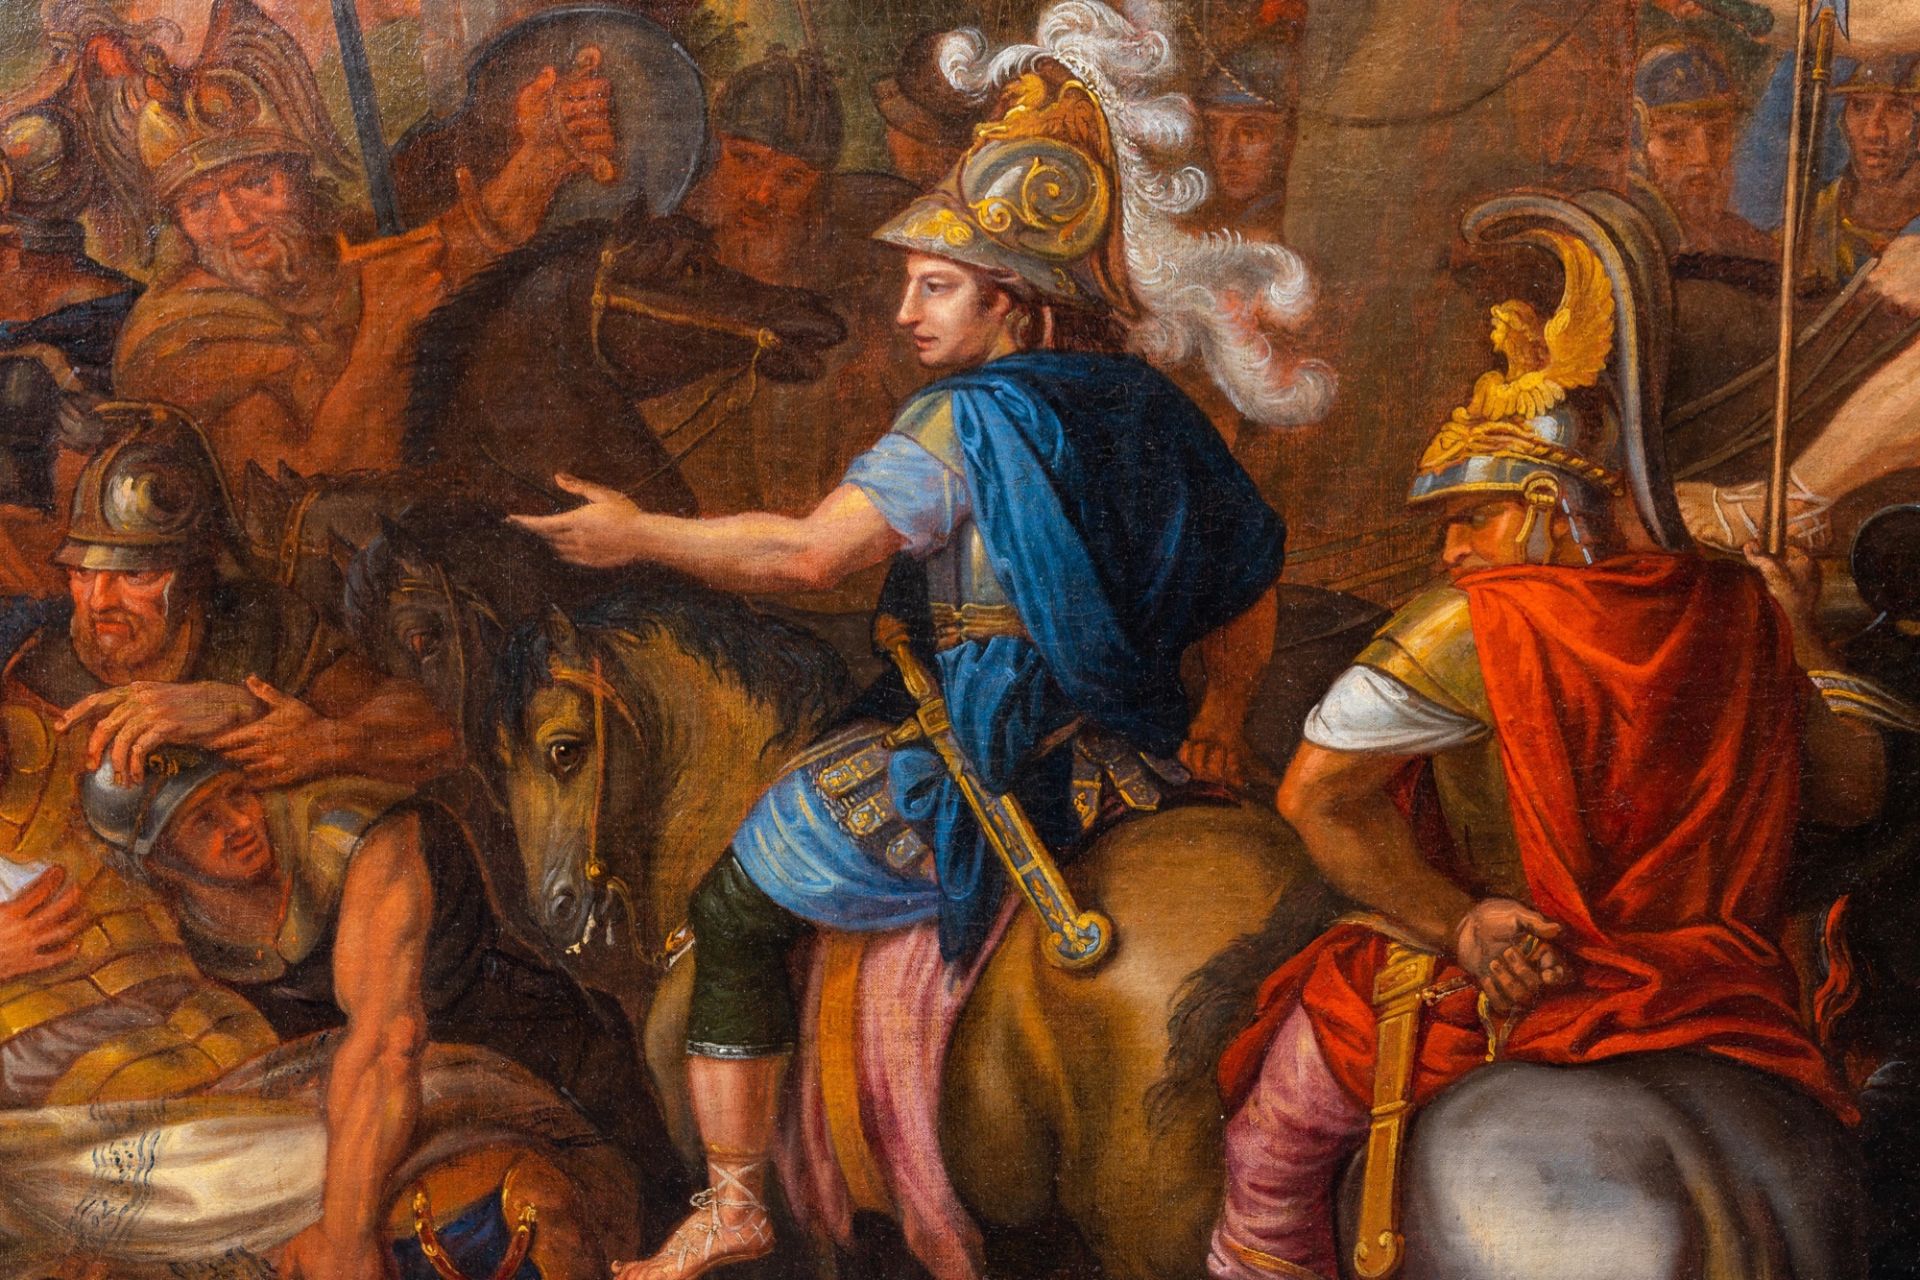 French school, workshop of Charles le Brun (1619-1690): Alexander and Poros in the Battle of Hydaspe - Image 13 of 24